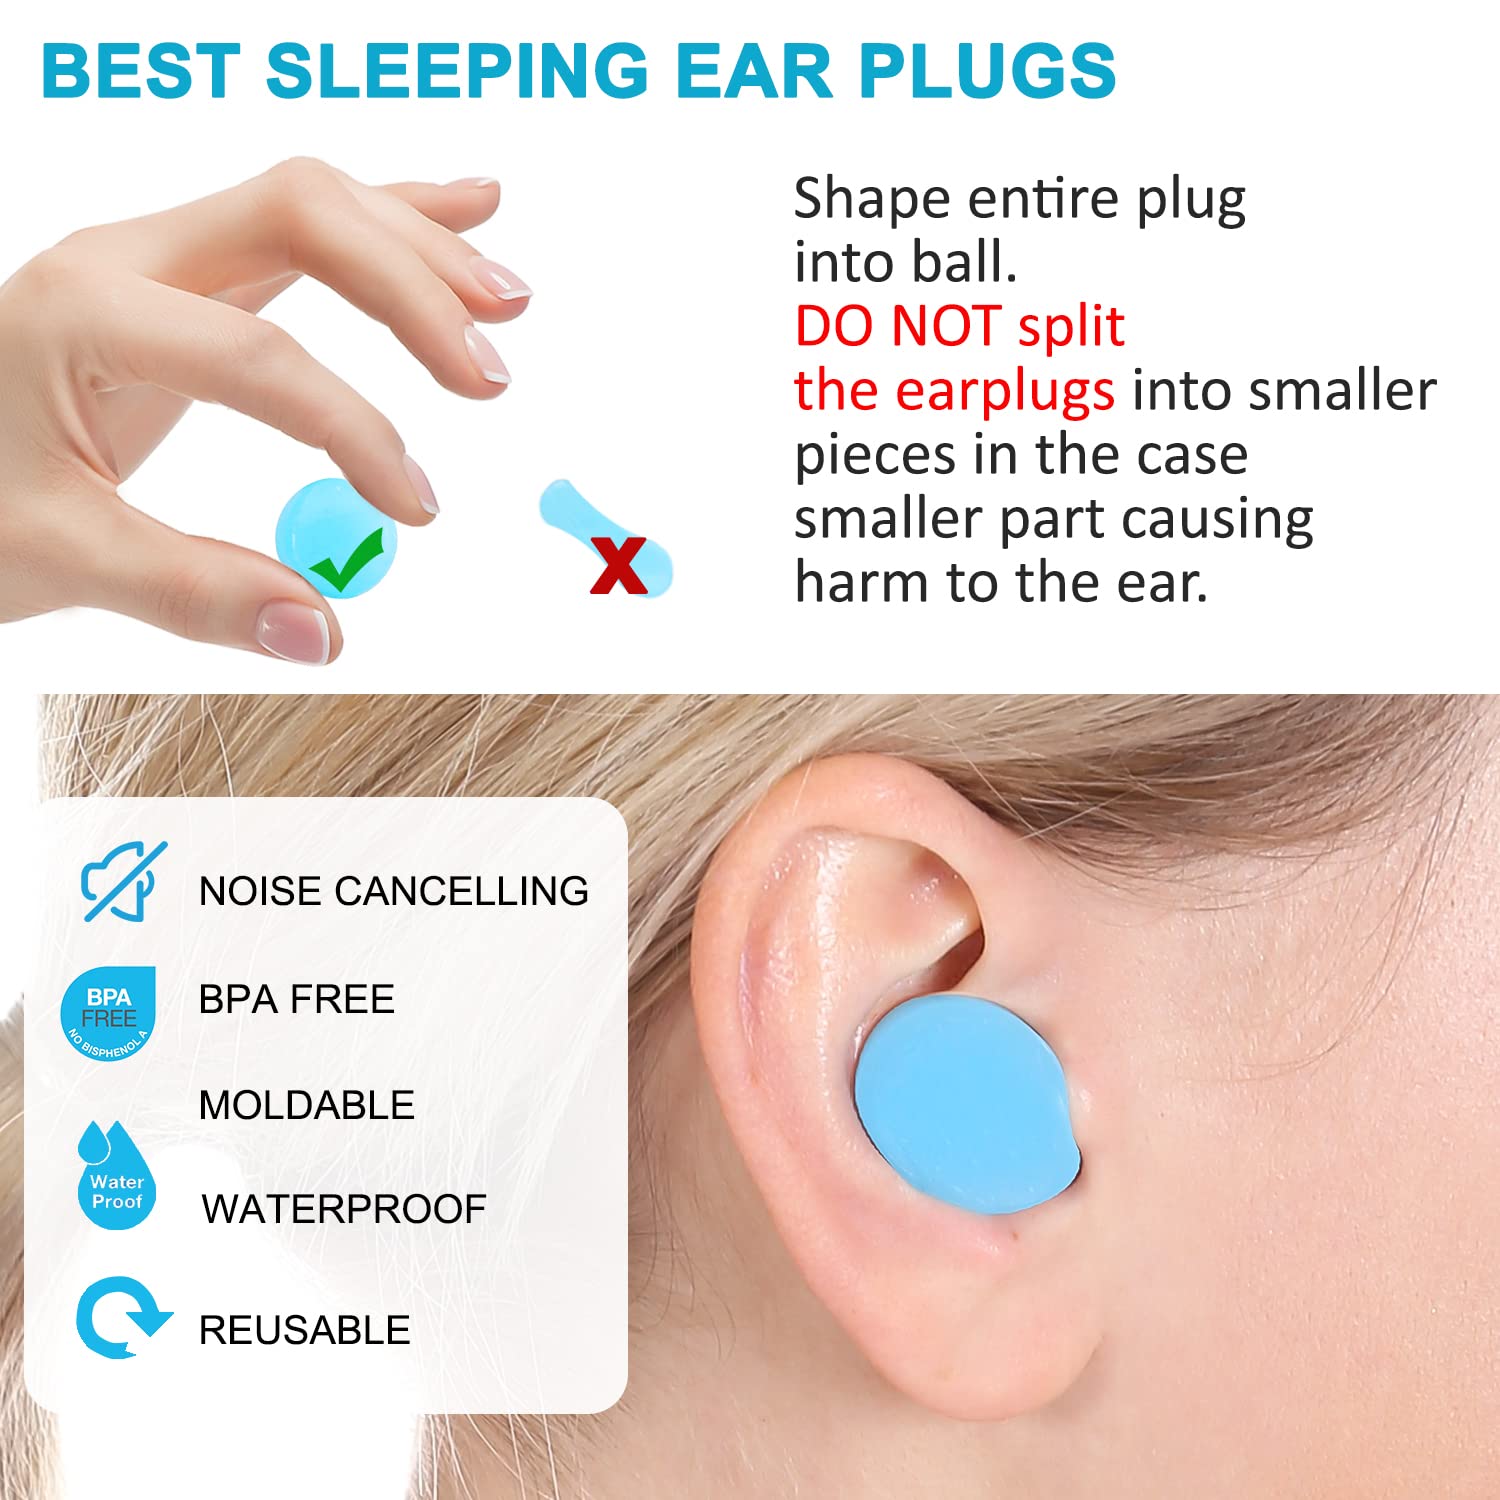 Reusable Silicone Ear Plugs, Waterproof Noise Cancelling EarPlugs for Sleeping, Mowing, Swimming, Airplanes, Concerts, 22dB Highest NRR